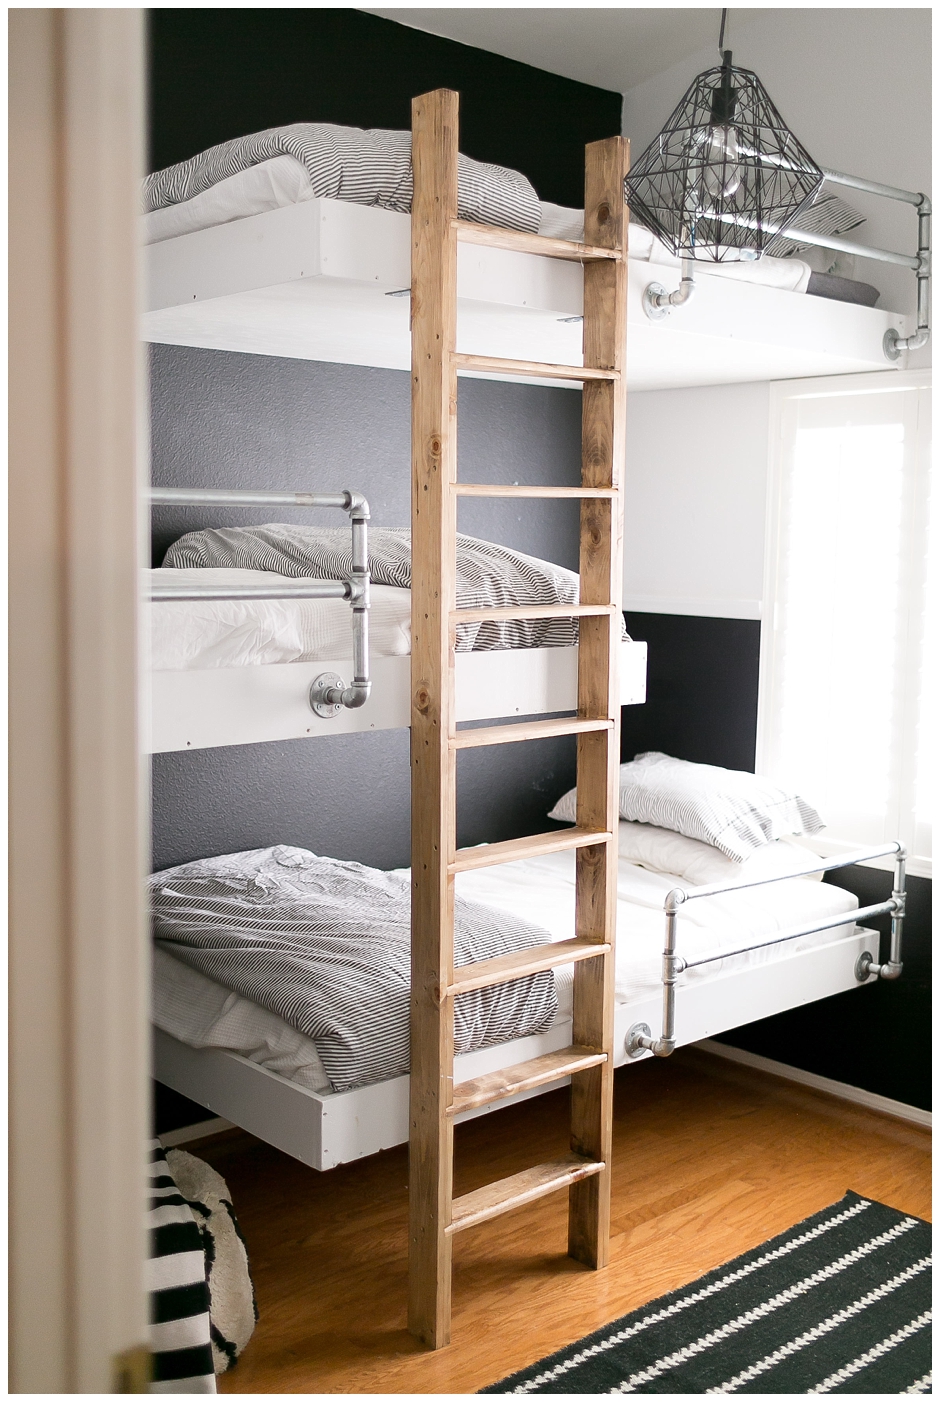 Triple Bunk Beds.Triple Bunk Bed Plans. . Triple Bunk Bed ...